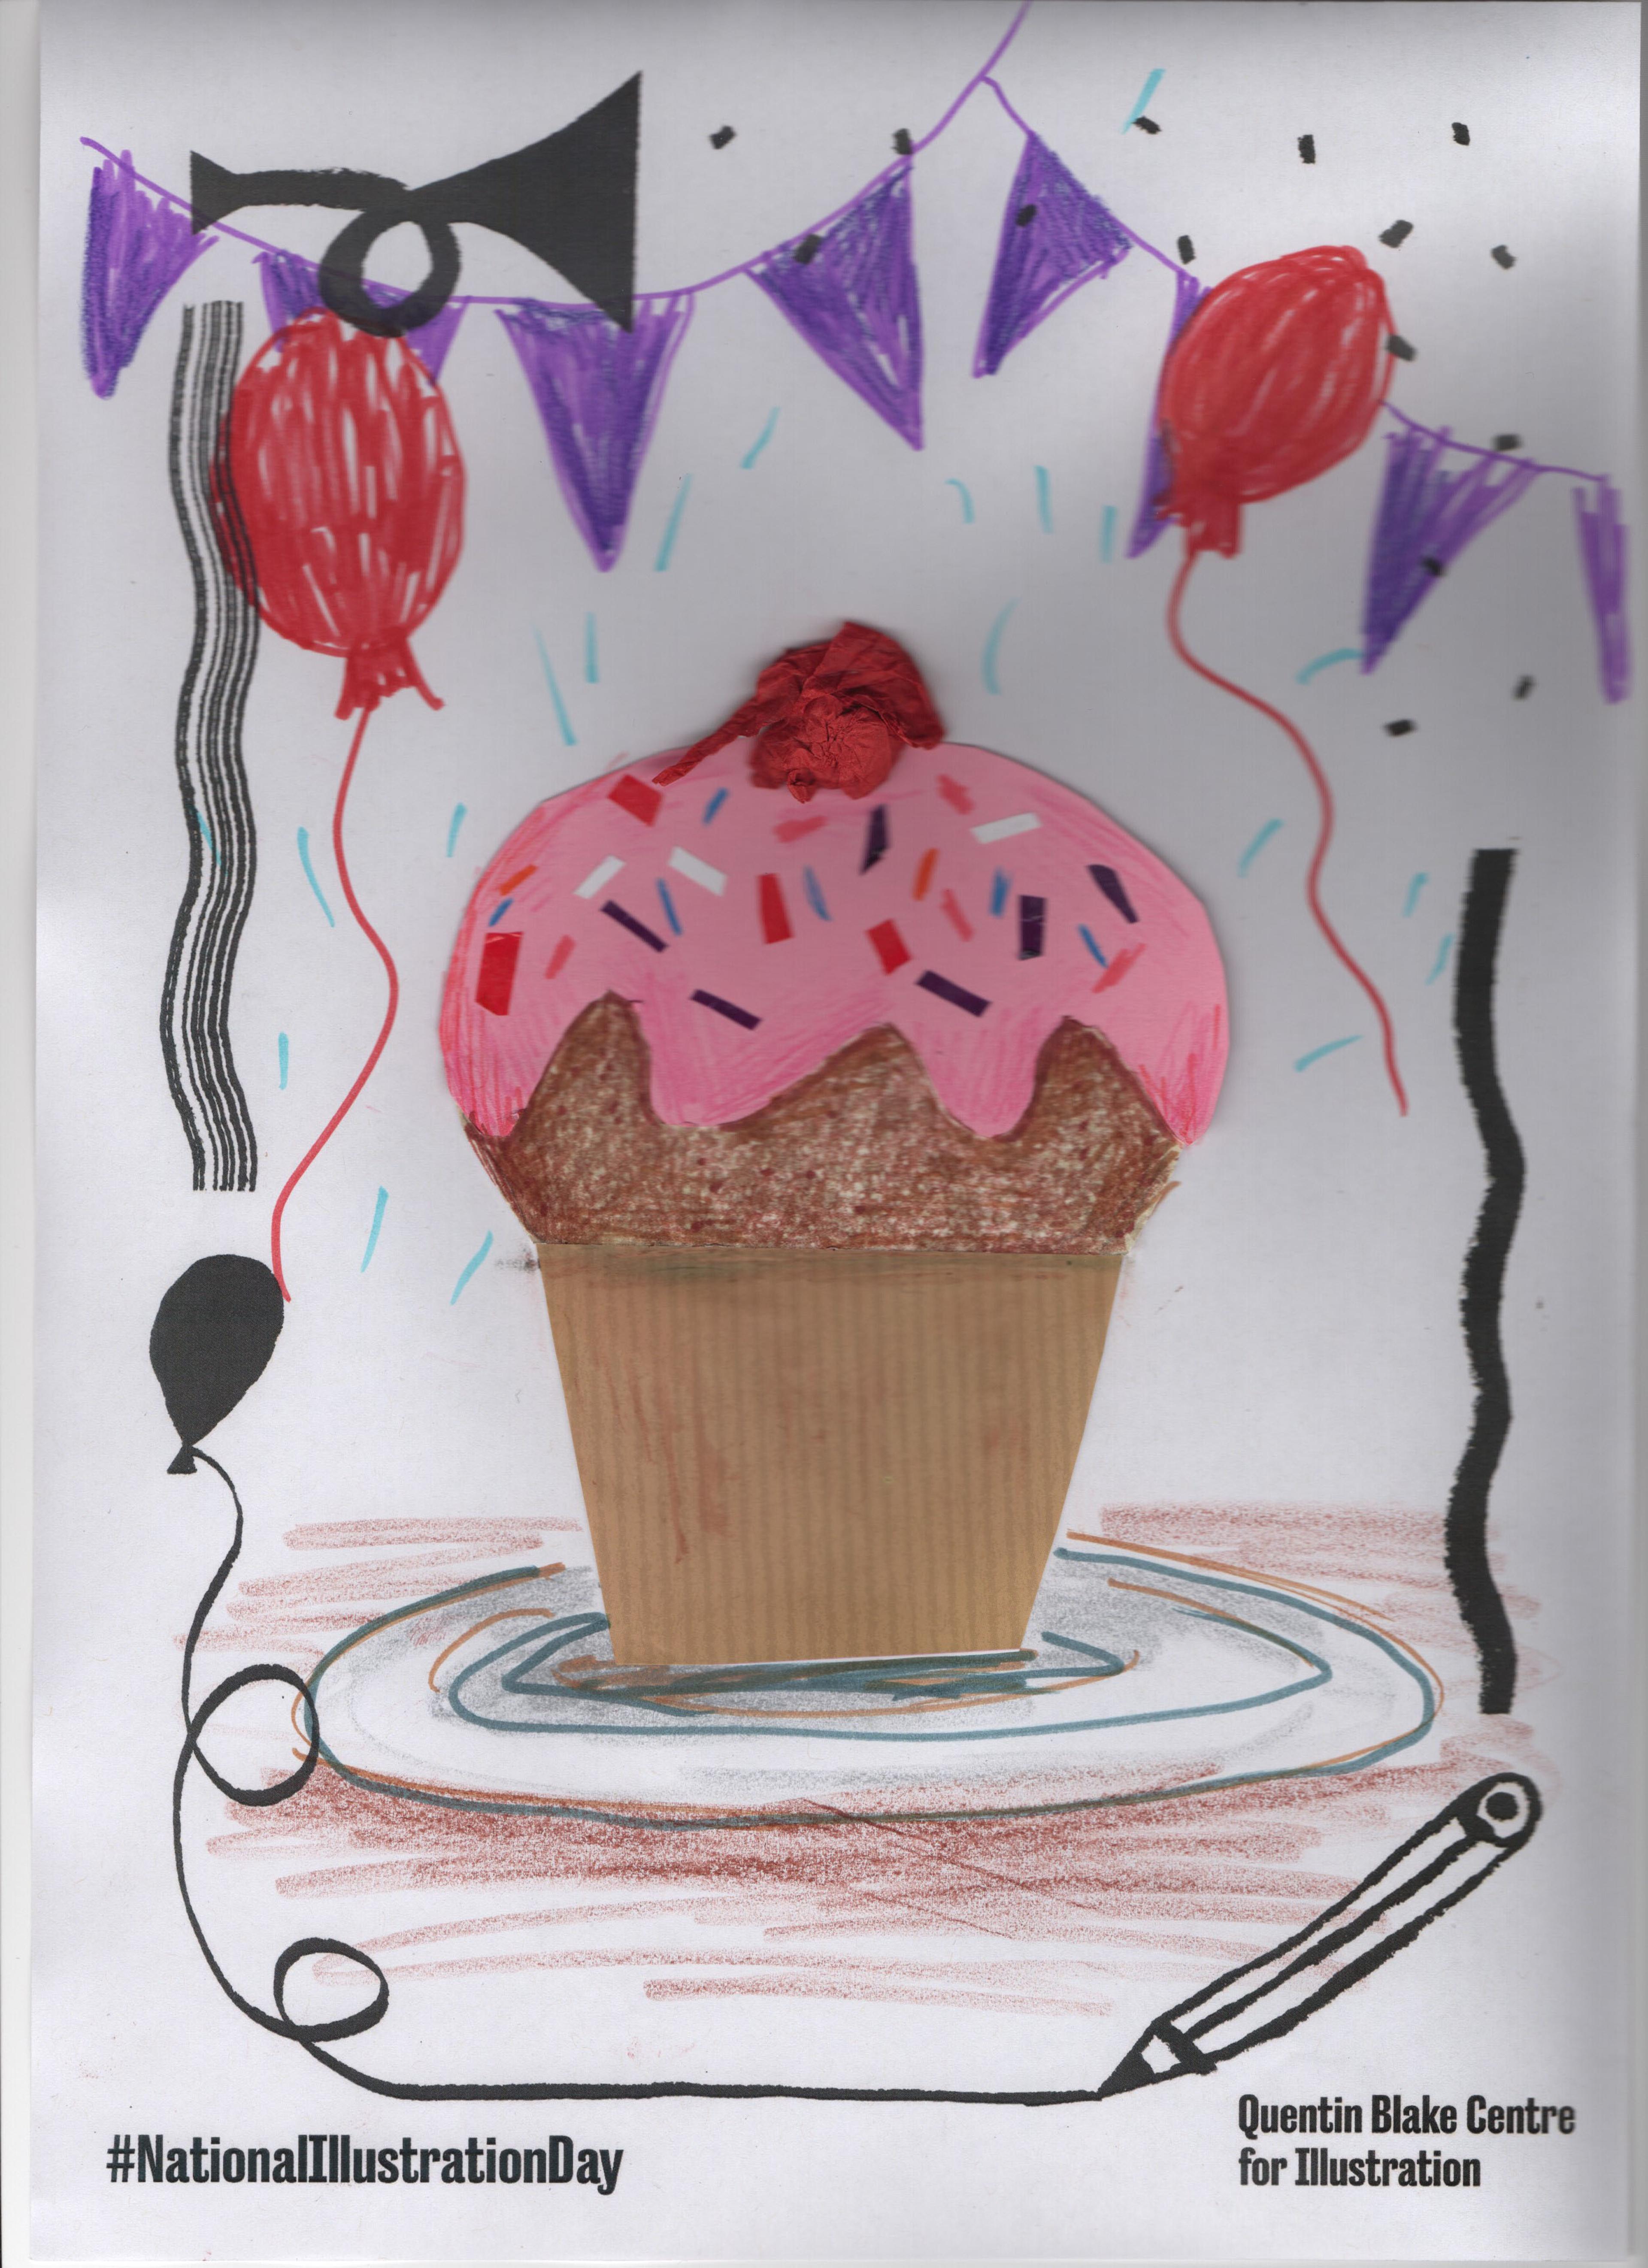 Illustration of one cupcake with a cherry on top surrounded by balloons and bunting.